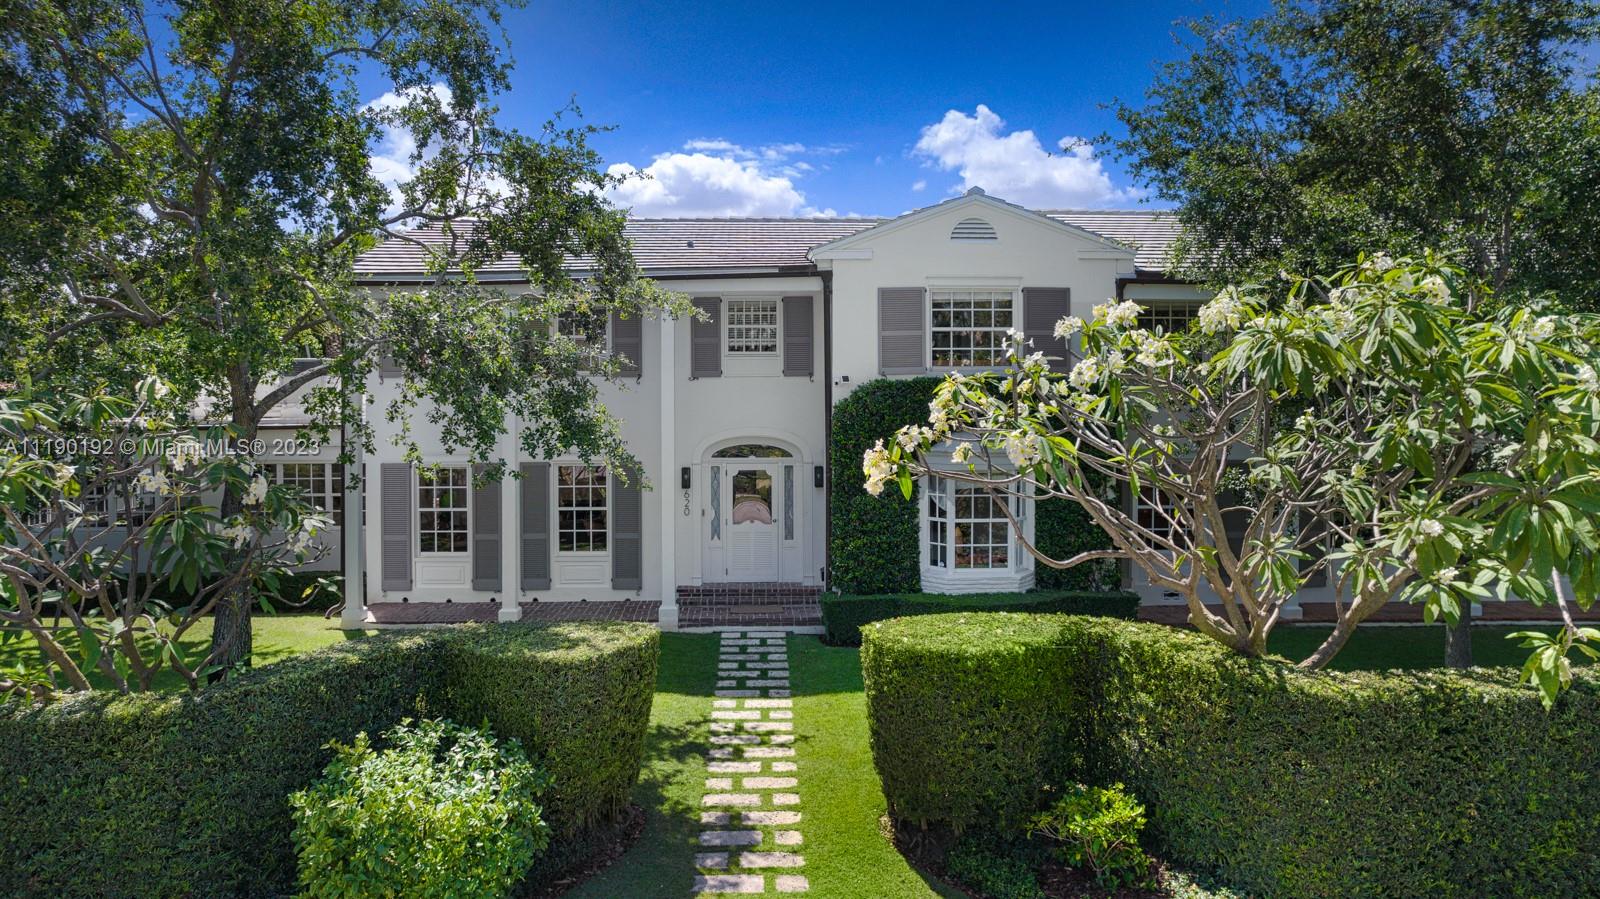 Welcome to 620 E Dilido Drive - a very rare gem in Miami’s most sought after neighborhood, Venetian Islands. This charming, designer home on a corner, double lot (15,000 SF) is the ideal family home. Over 6,000 SF of interiors, with 6 bedrooms, 5 bathrooms, this colonial beauty exudes elegance and style.
Living areas are flooded with natural light. Floor to ceiling sliding doors walk you from your chef’s kitchen, complete with large island, gas range, Subzero and Miele appliances to your beautiful garden, cabana and pool area. Master suite has a beautiful walk in closet, bathroom and sitting area.This is your dream house, your one of a kind home on exclusive Dilido Island. If you are looking for a warm, family friendly home an oversized lot look no further -  your search is over.